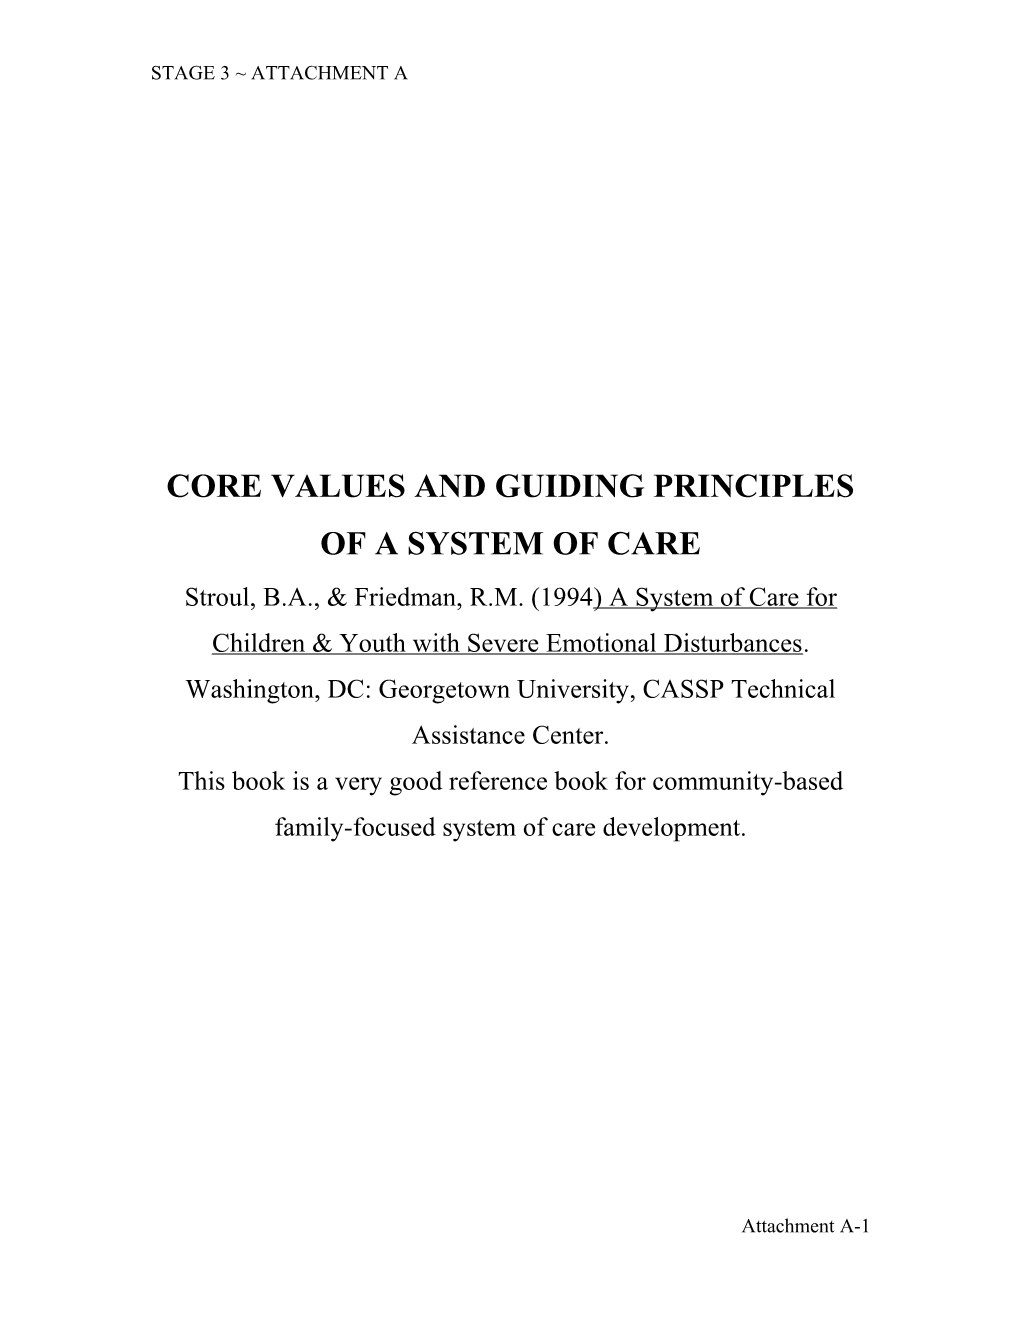 Core Values and Guiding Principles of a System of Care